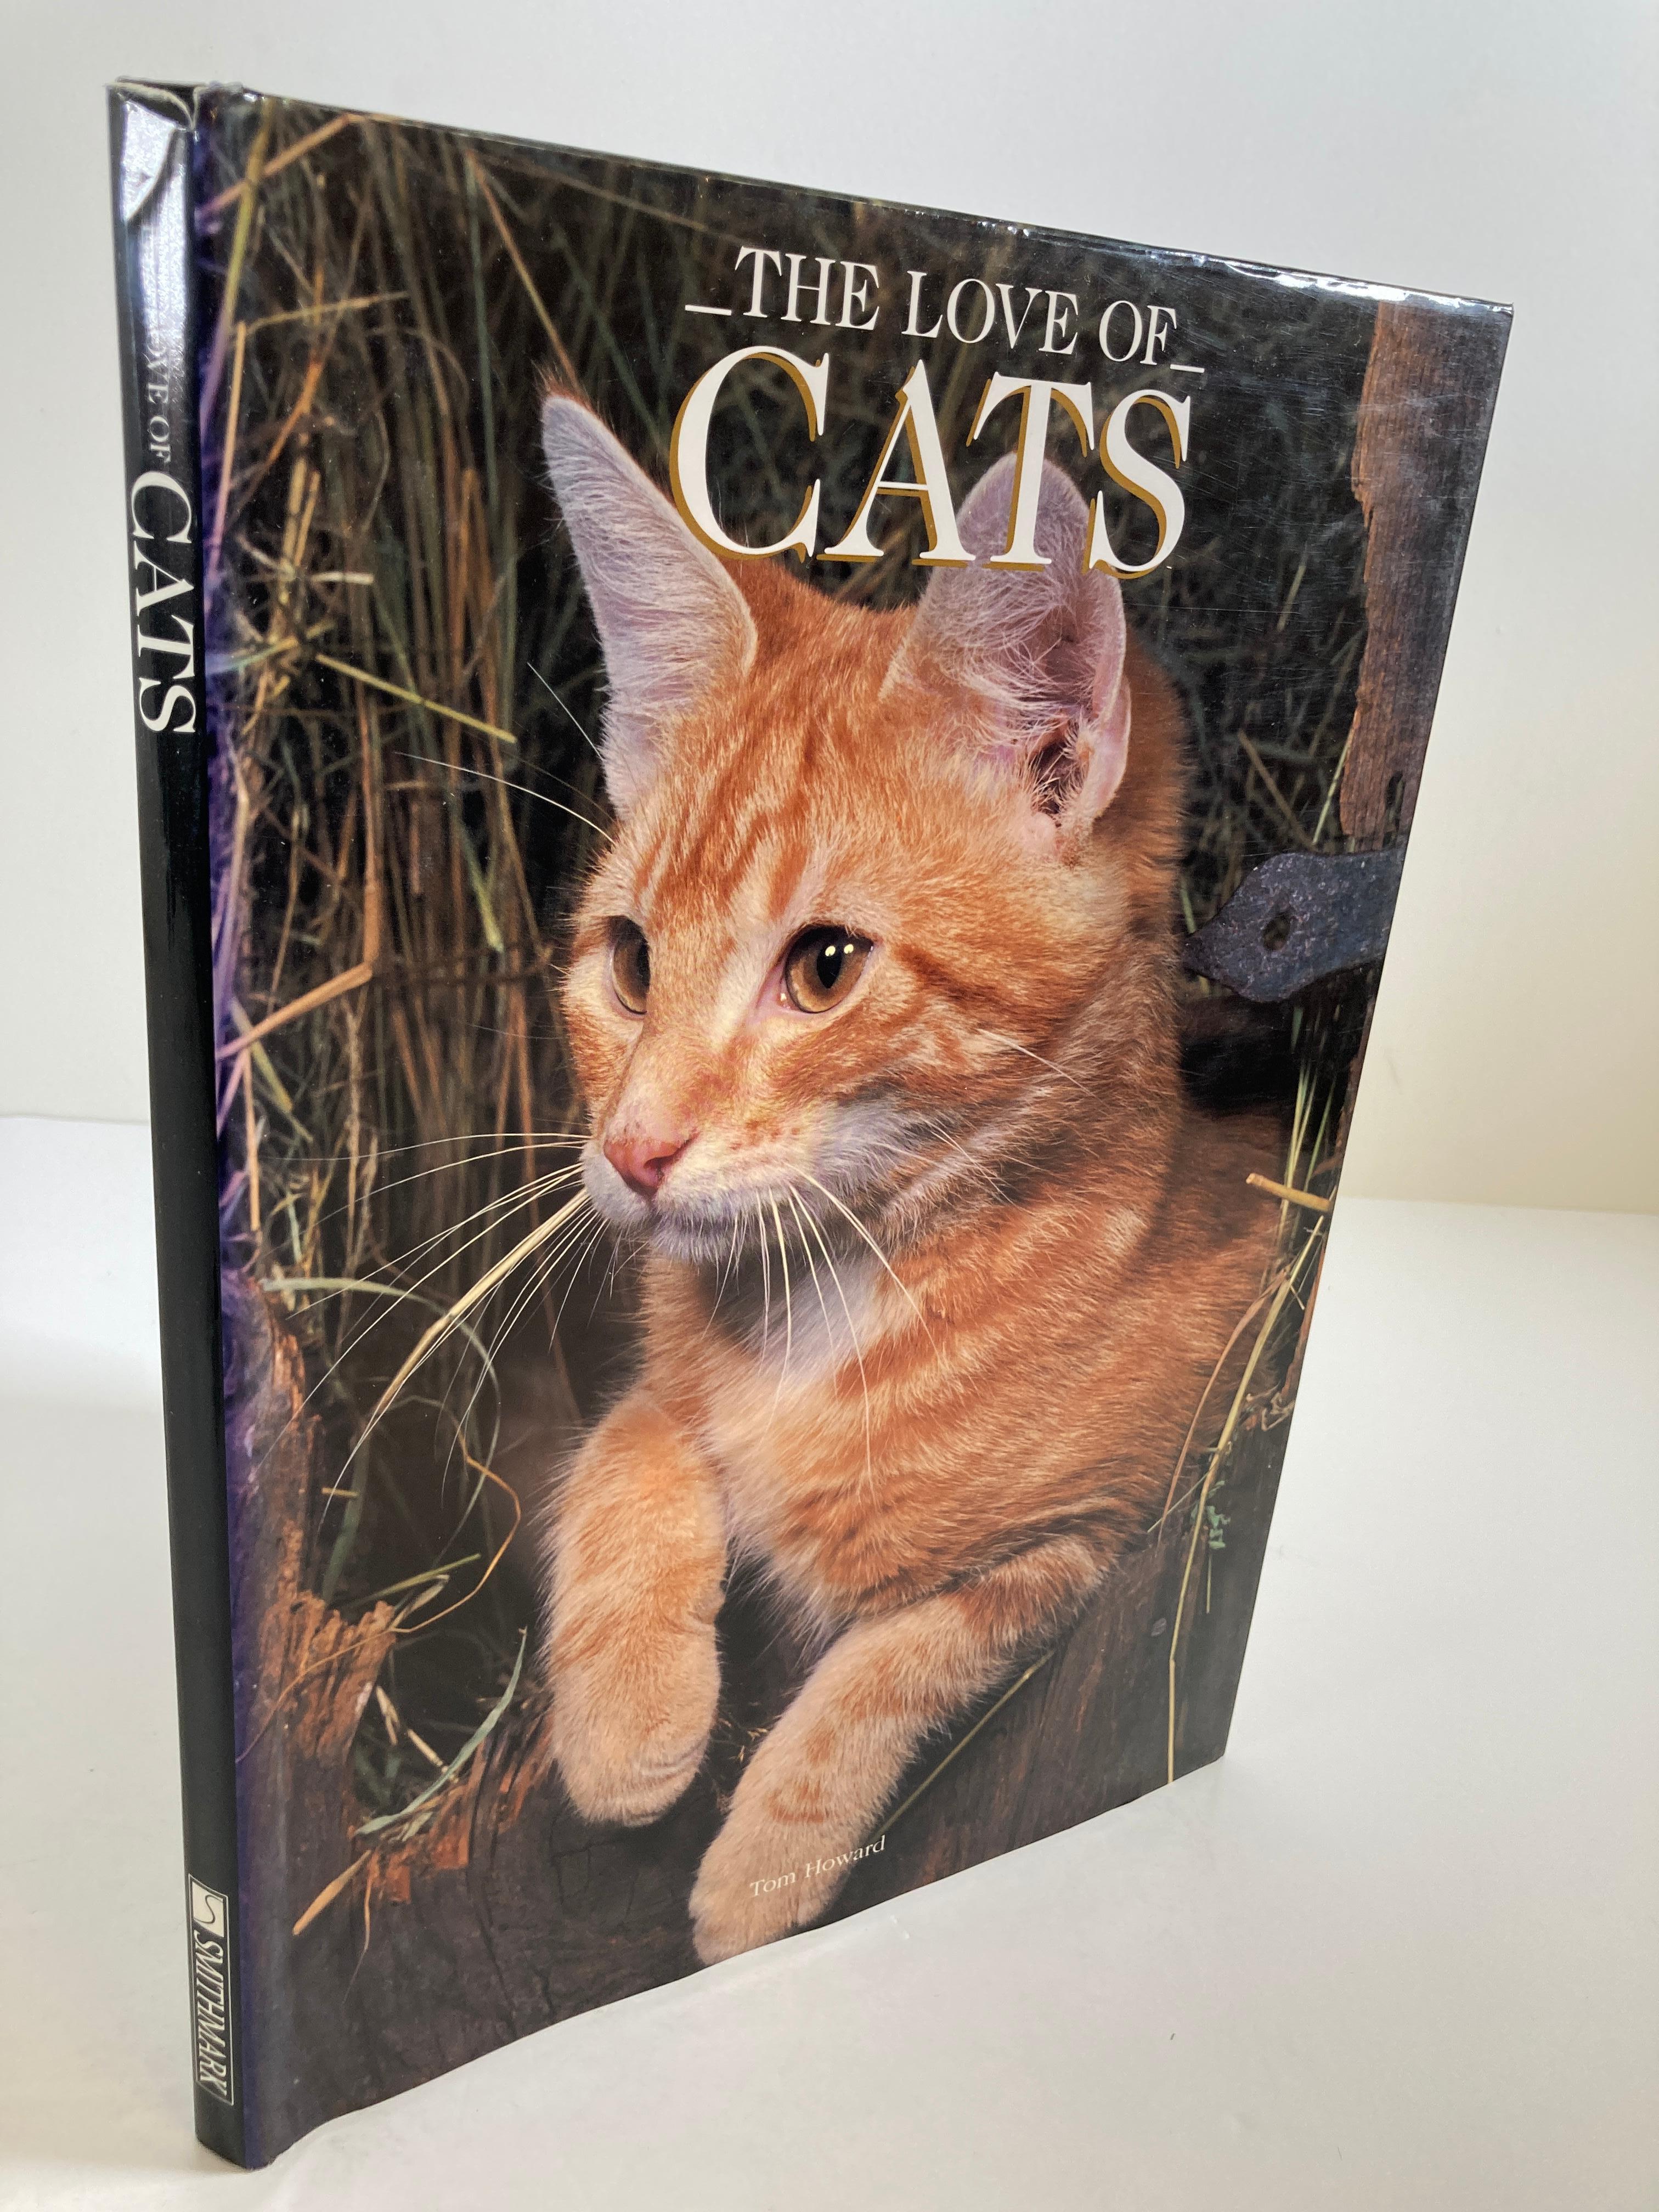 Love of Cats by Tom Howard Hardcover Book 4